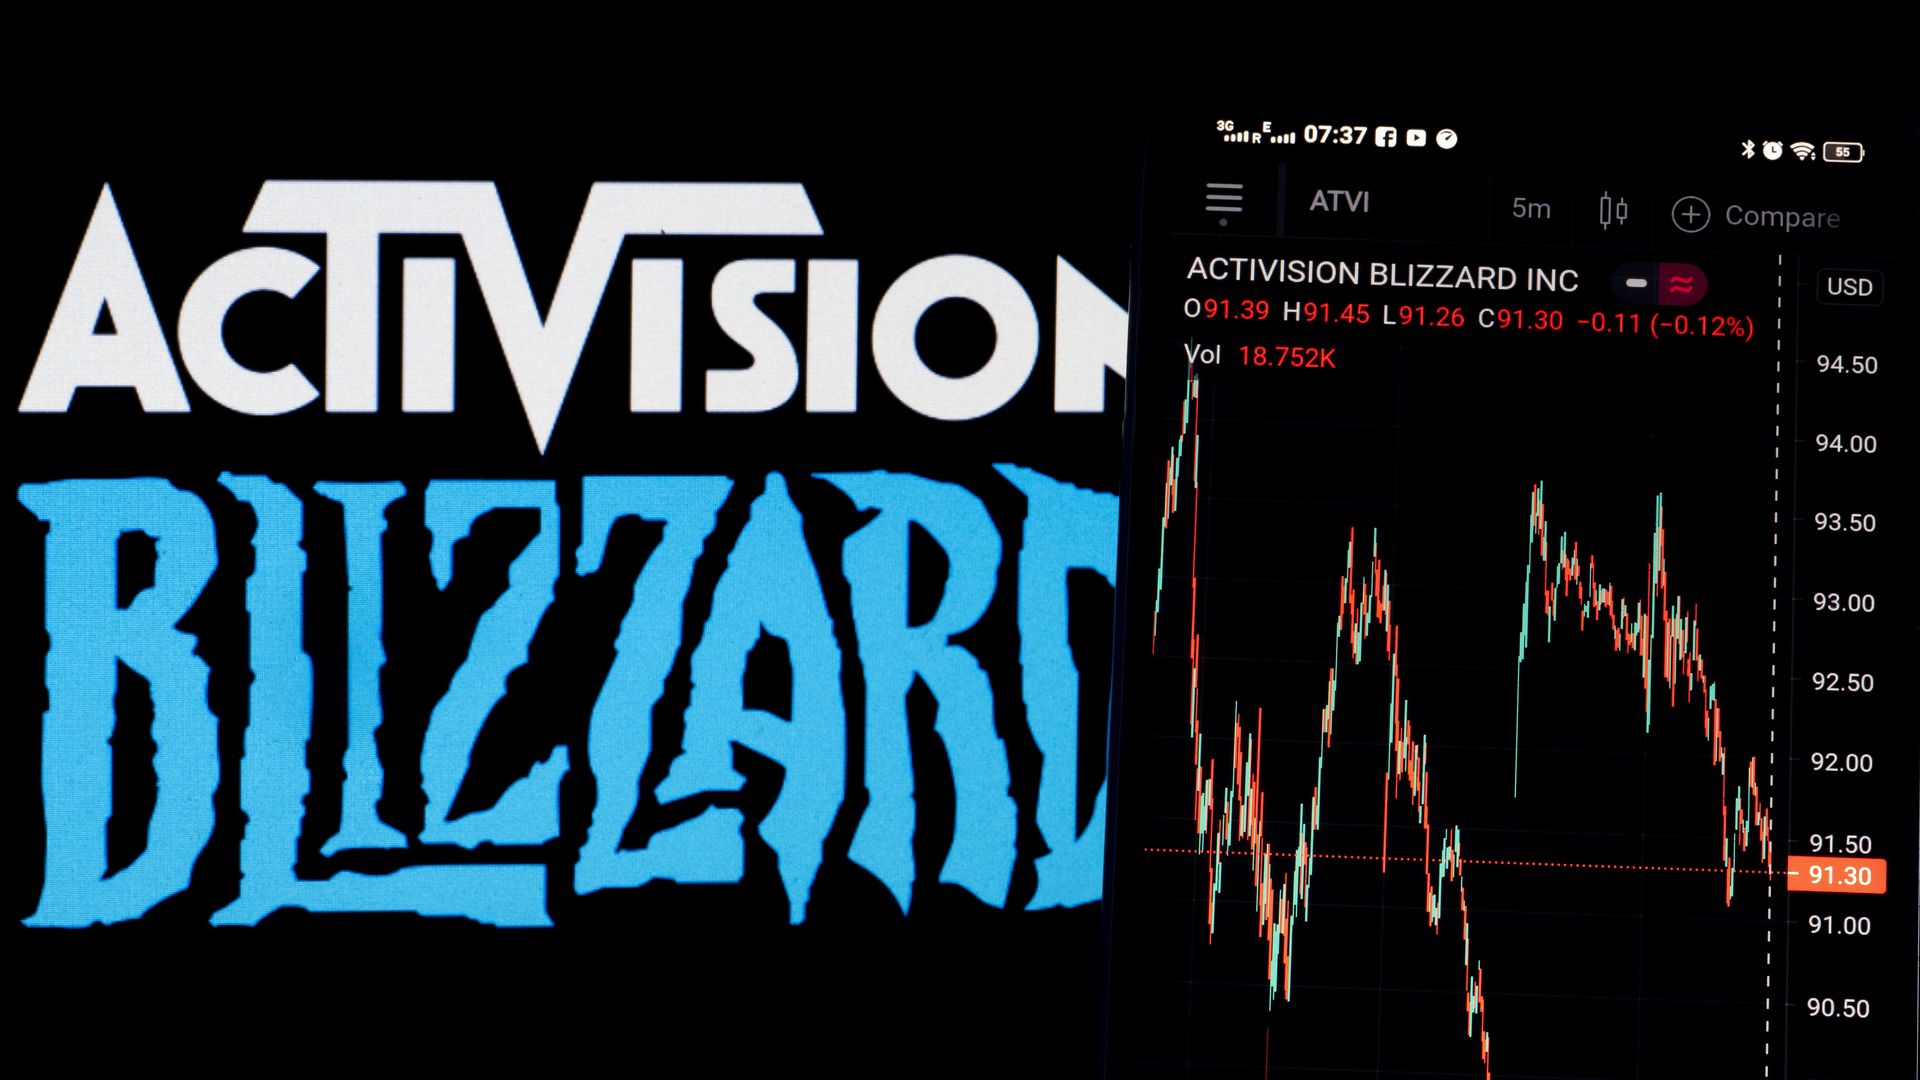 Photo illustration of Activision Blizzard's logo and a chart of its stock price